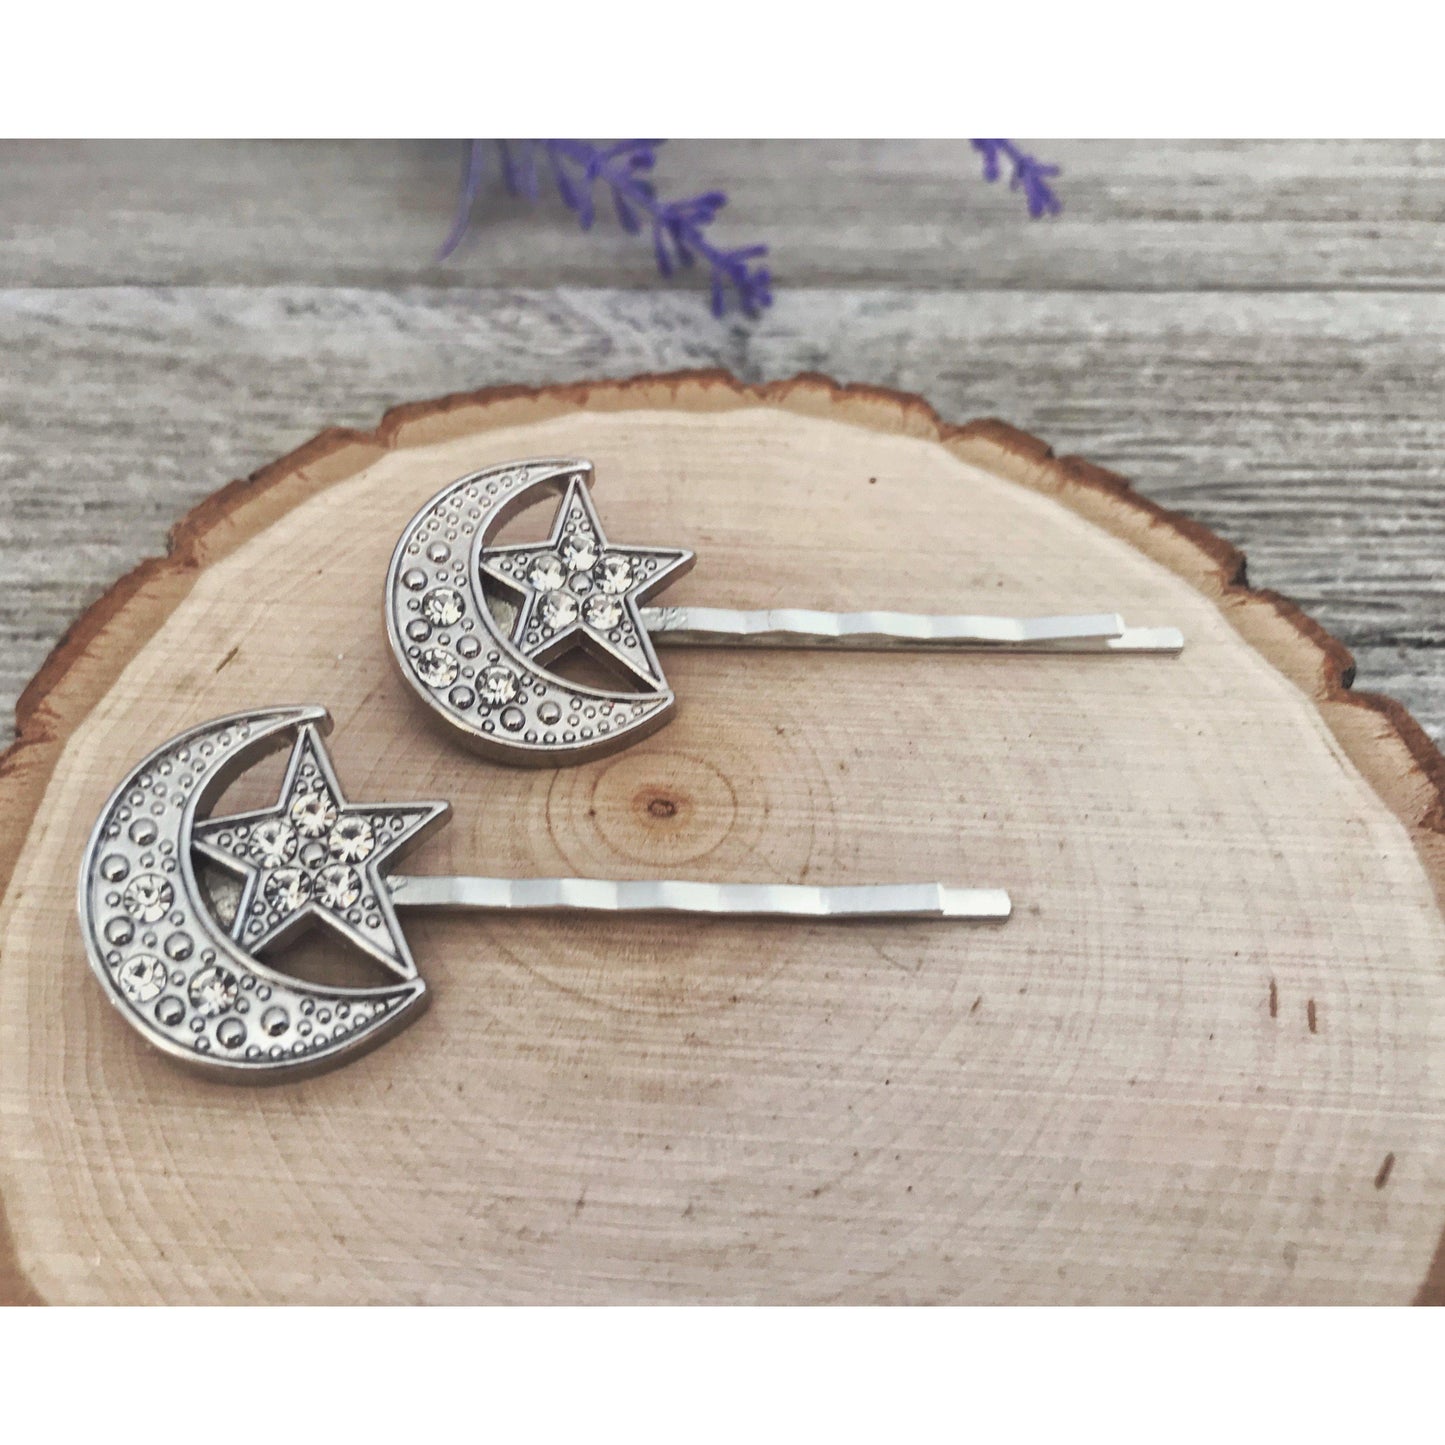 Moon & Stars Rhinestone Bobby Pins: Celestial Accents for Dreamy Hairstyles